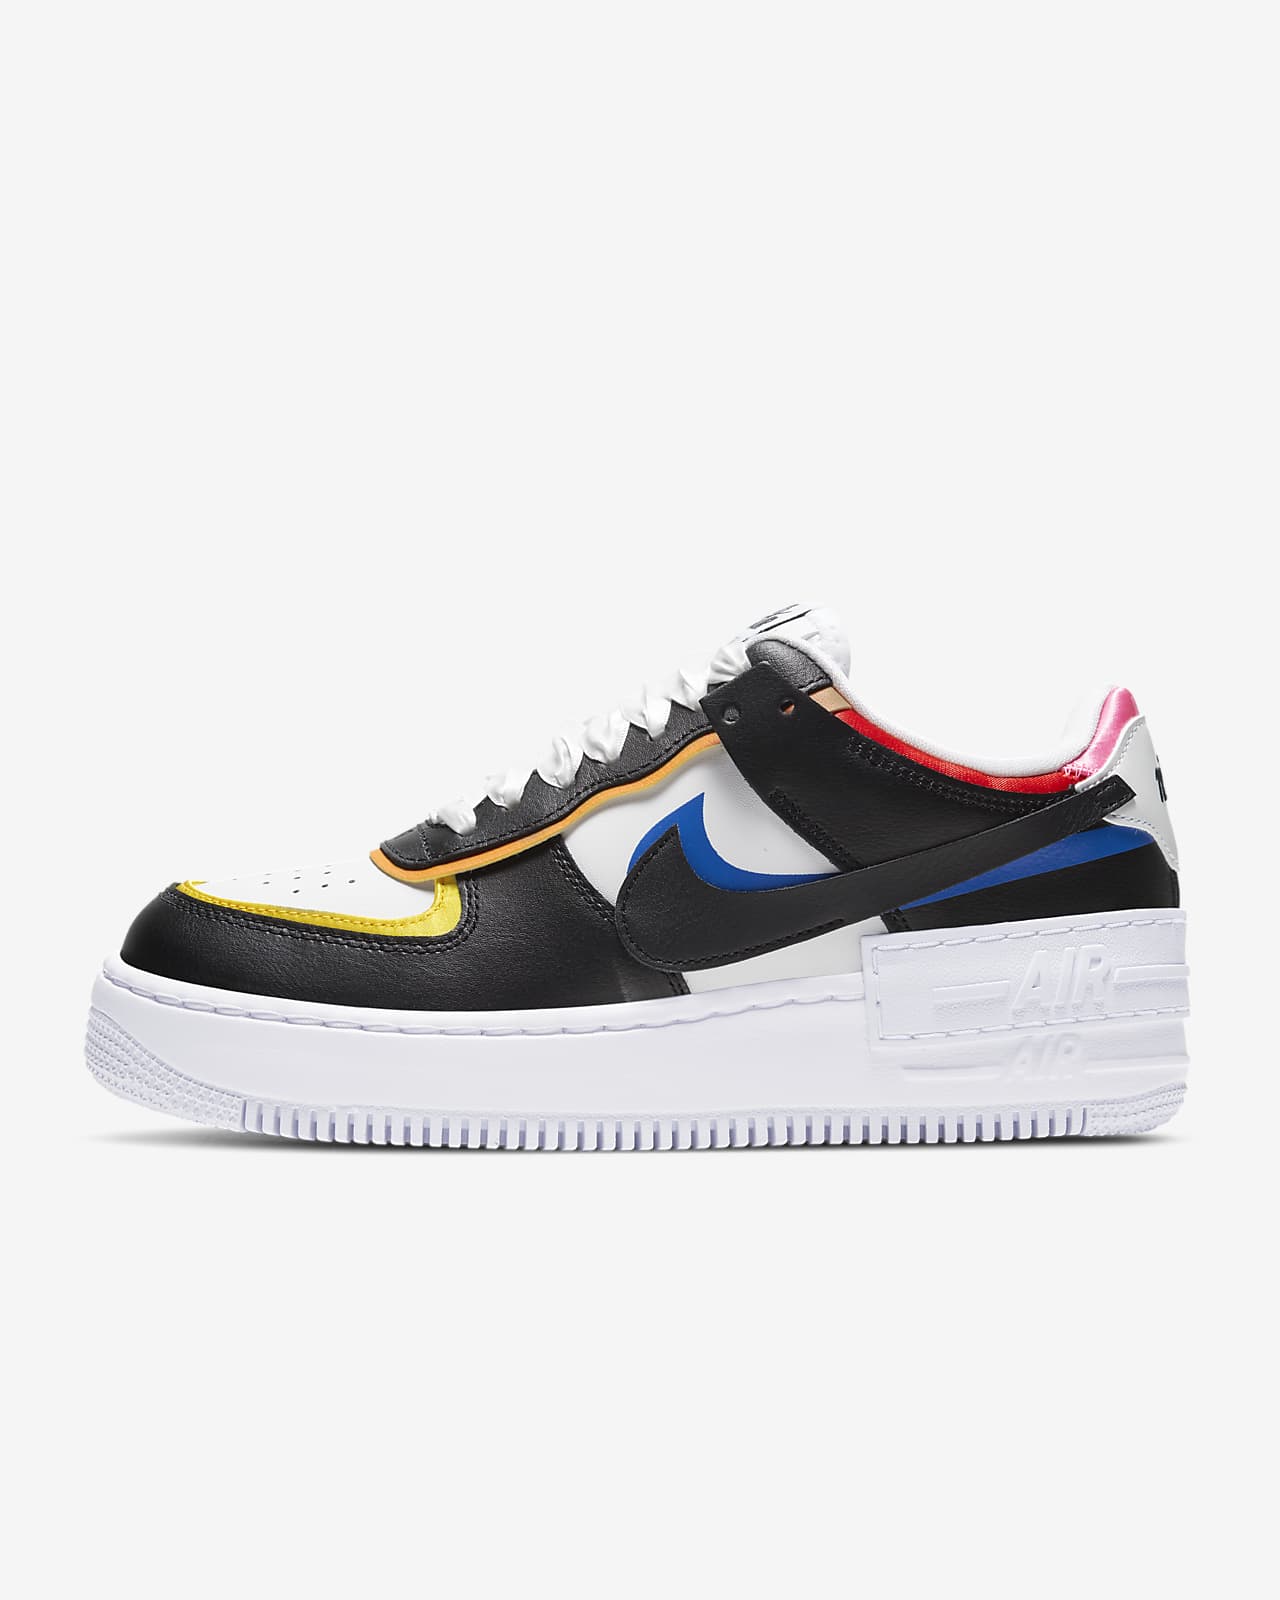 Chaussure Nike Air Force 1 Shadow pour Femme